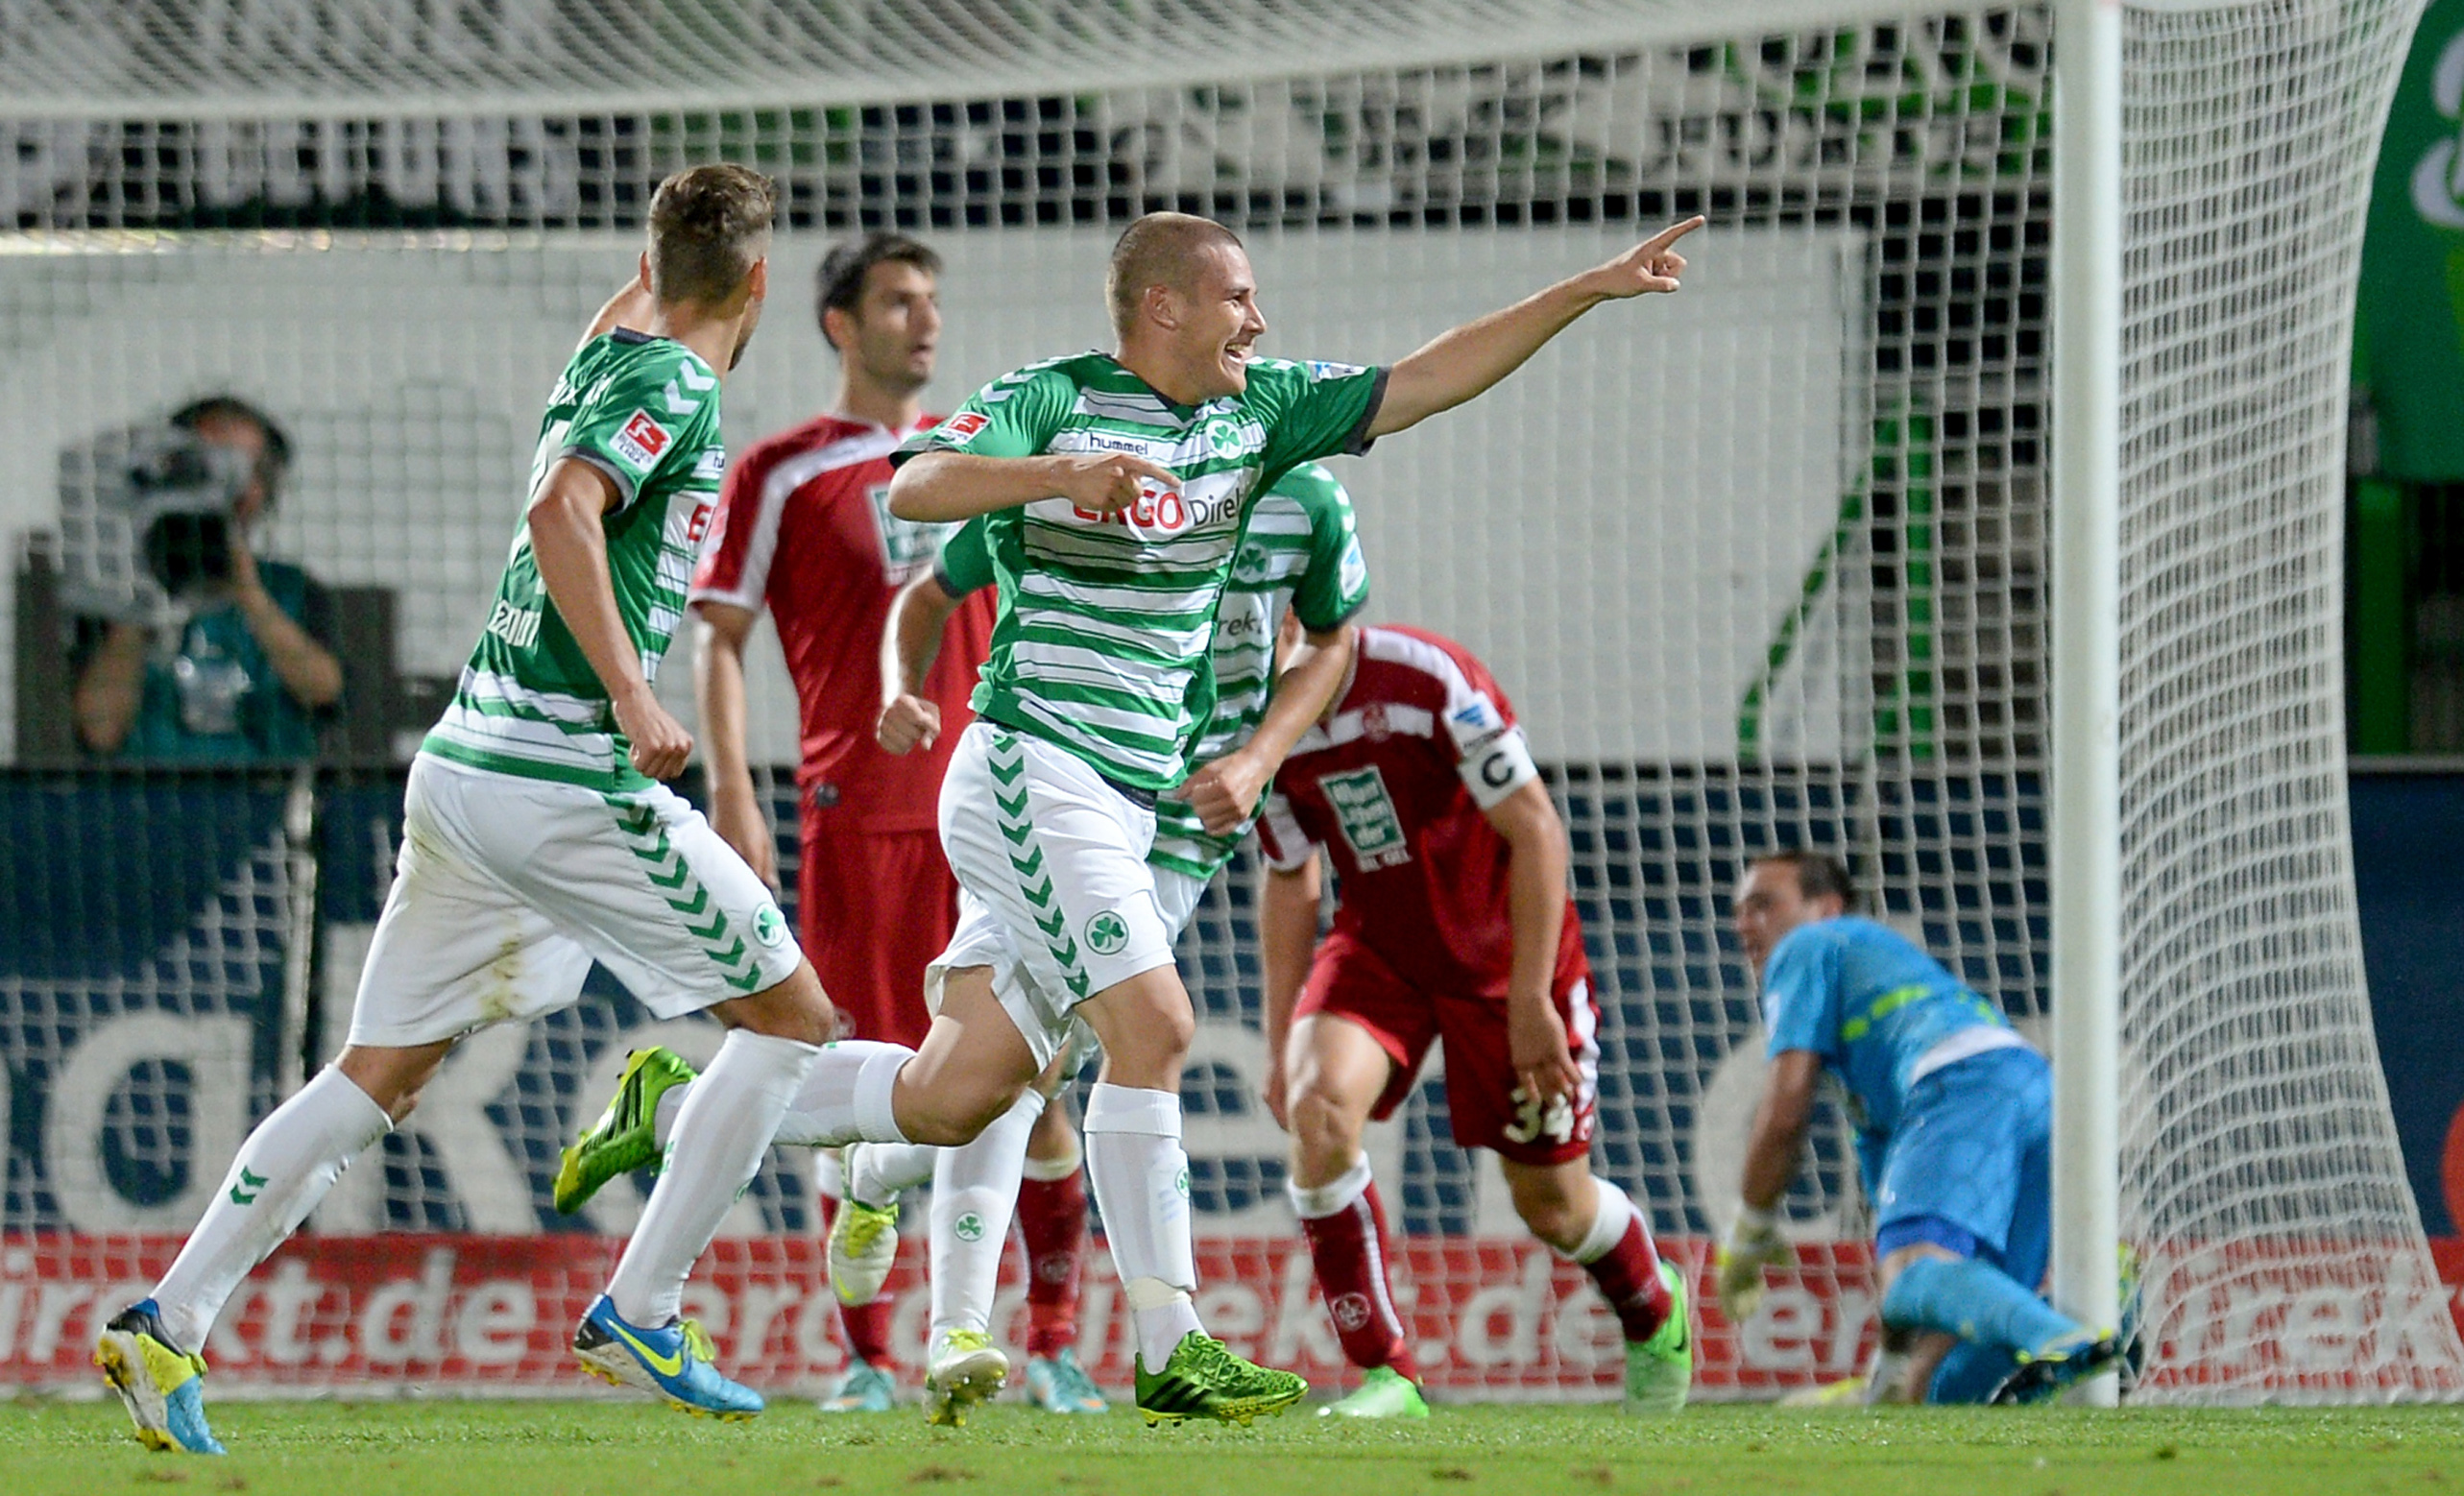 FUERTH, GERMANY - AUGUST 12:  Ognjen Mudrinski (C) of Fuerth celebrates after scoring his team's second goal during the second Bundesliga match between SpVgg Greuther Fuerth and 1. FC Kaiserslautern at Trolli-Arena on August 12, 2013 in Fuerth, Germany.  (Photo by Micha Will/Bongarts/Getty Images)